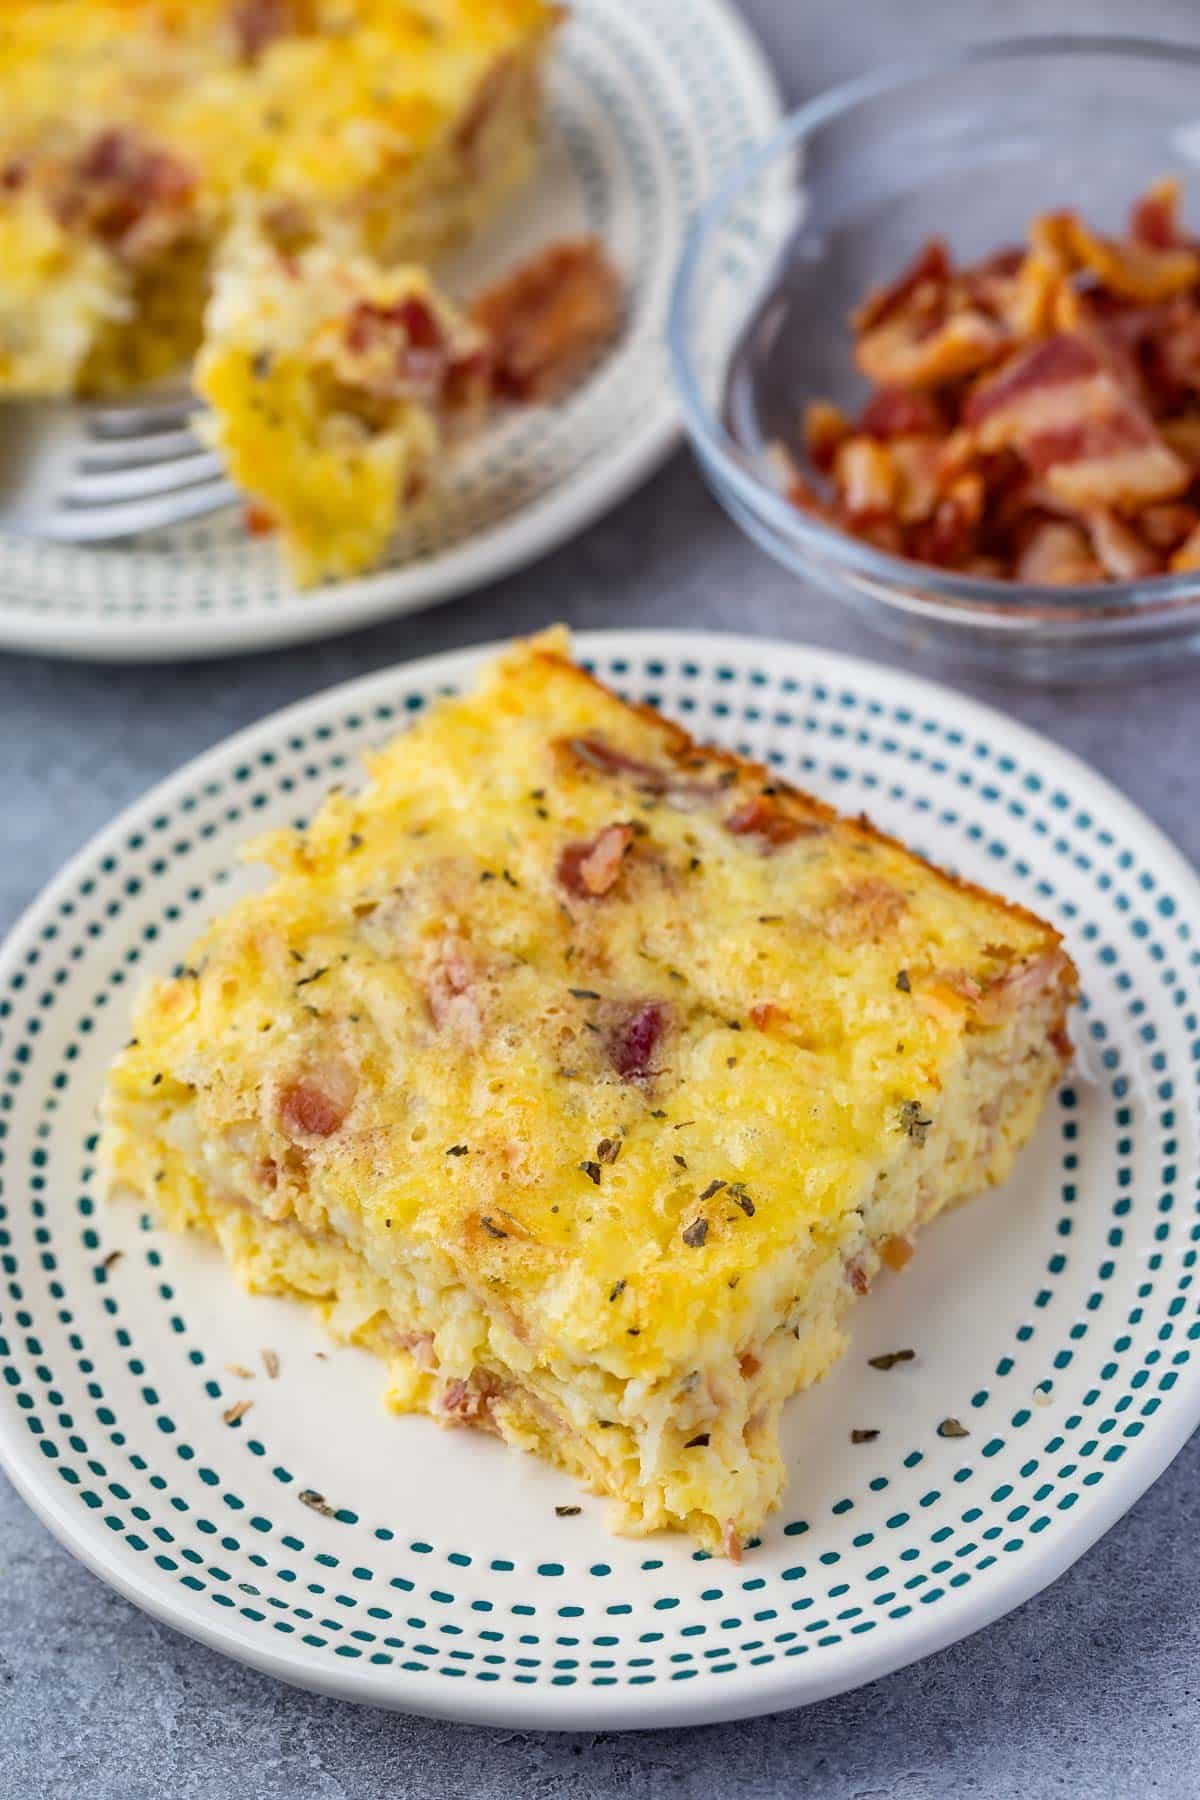 one slice of egg casserole with bacon baked in.